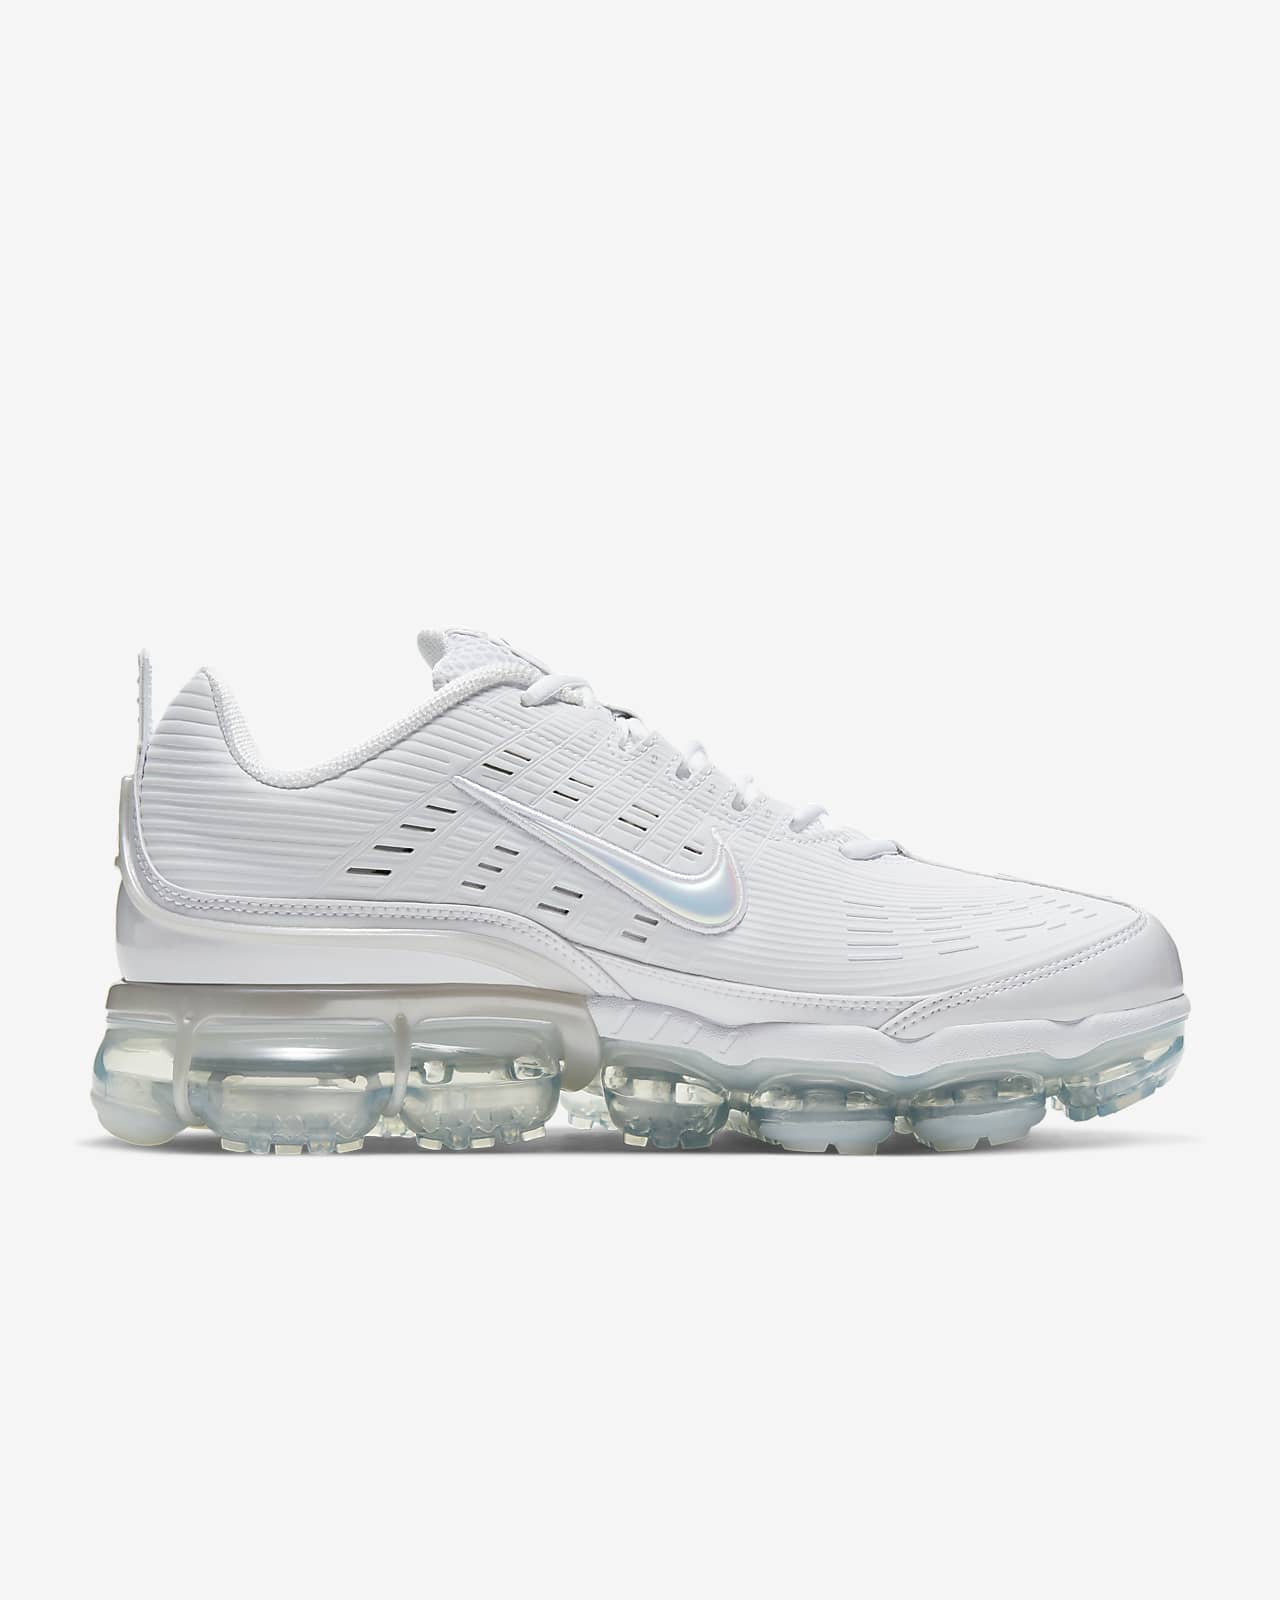 nike chaussure hommes vapormax